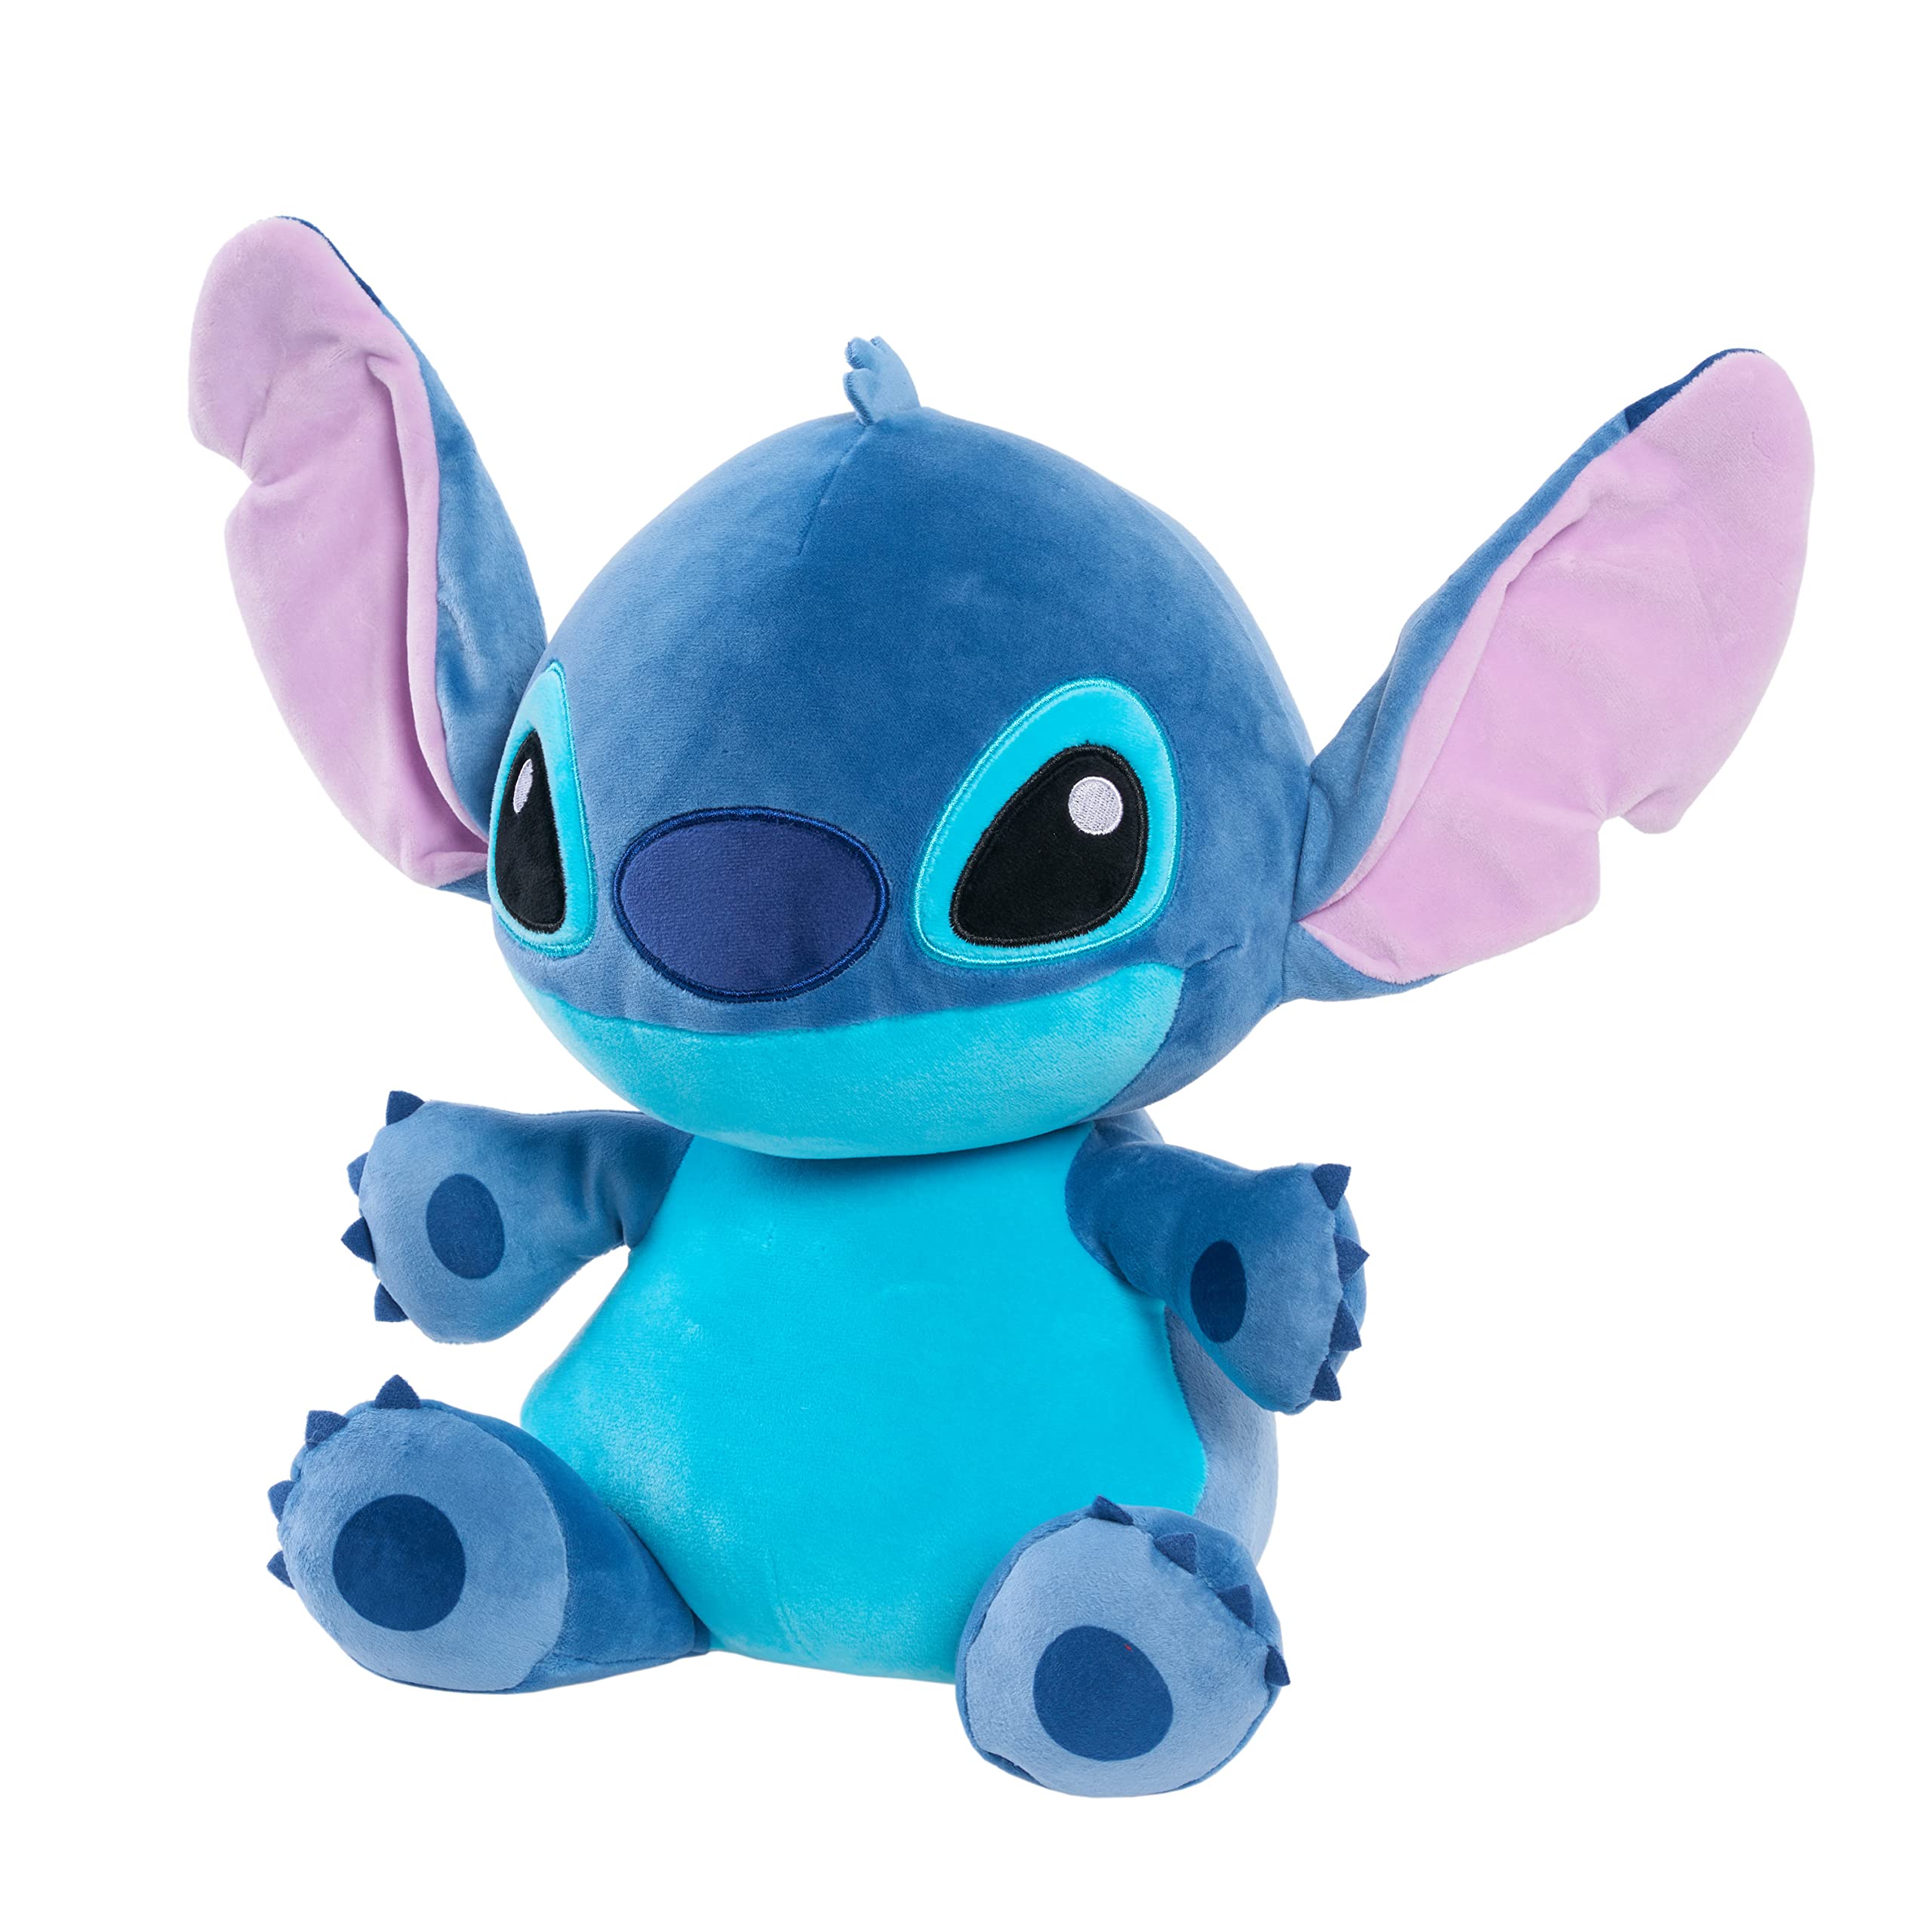 Disney Classics 14-inch Stitch, Comfort Weighted Plush, Officially Licensed Kids Toys for Ages 3 Up, Gifts and Presents by Just Play